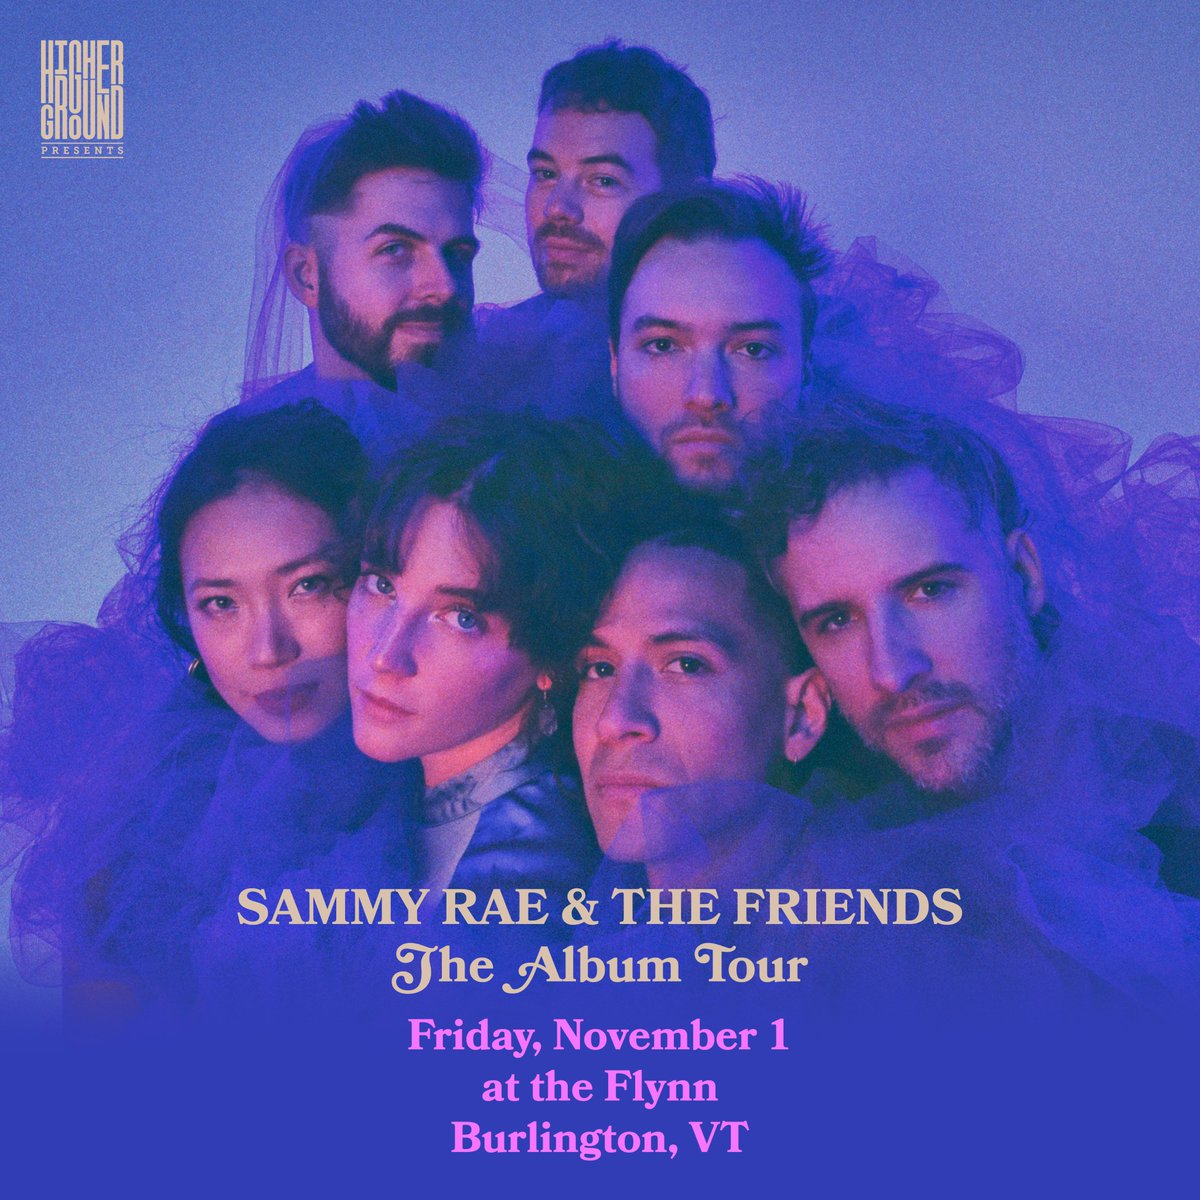 🌟PRESALE🌟 Sammy Rae & The Friends is back in VT on Friday, November 1st at the Flynn. 🎫 Be the first to access tickets with the code FRIENDSHG: bit.ly/FRIENDSHG